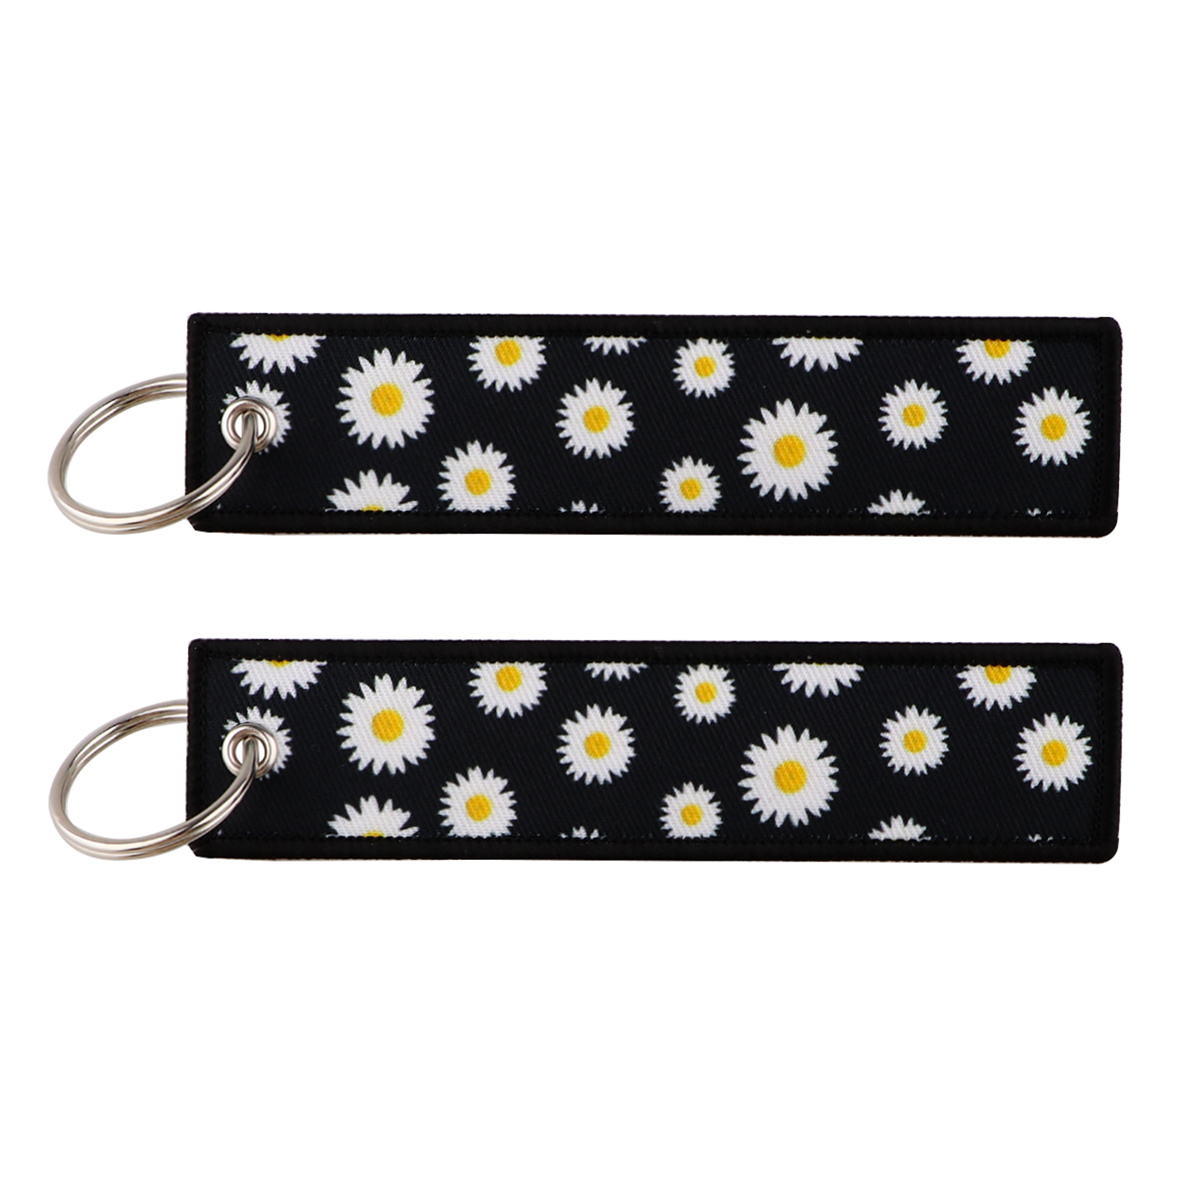 Good Luck Koi Fish Daisy Embroidered Keys Tag Keychains Jet Tag